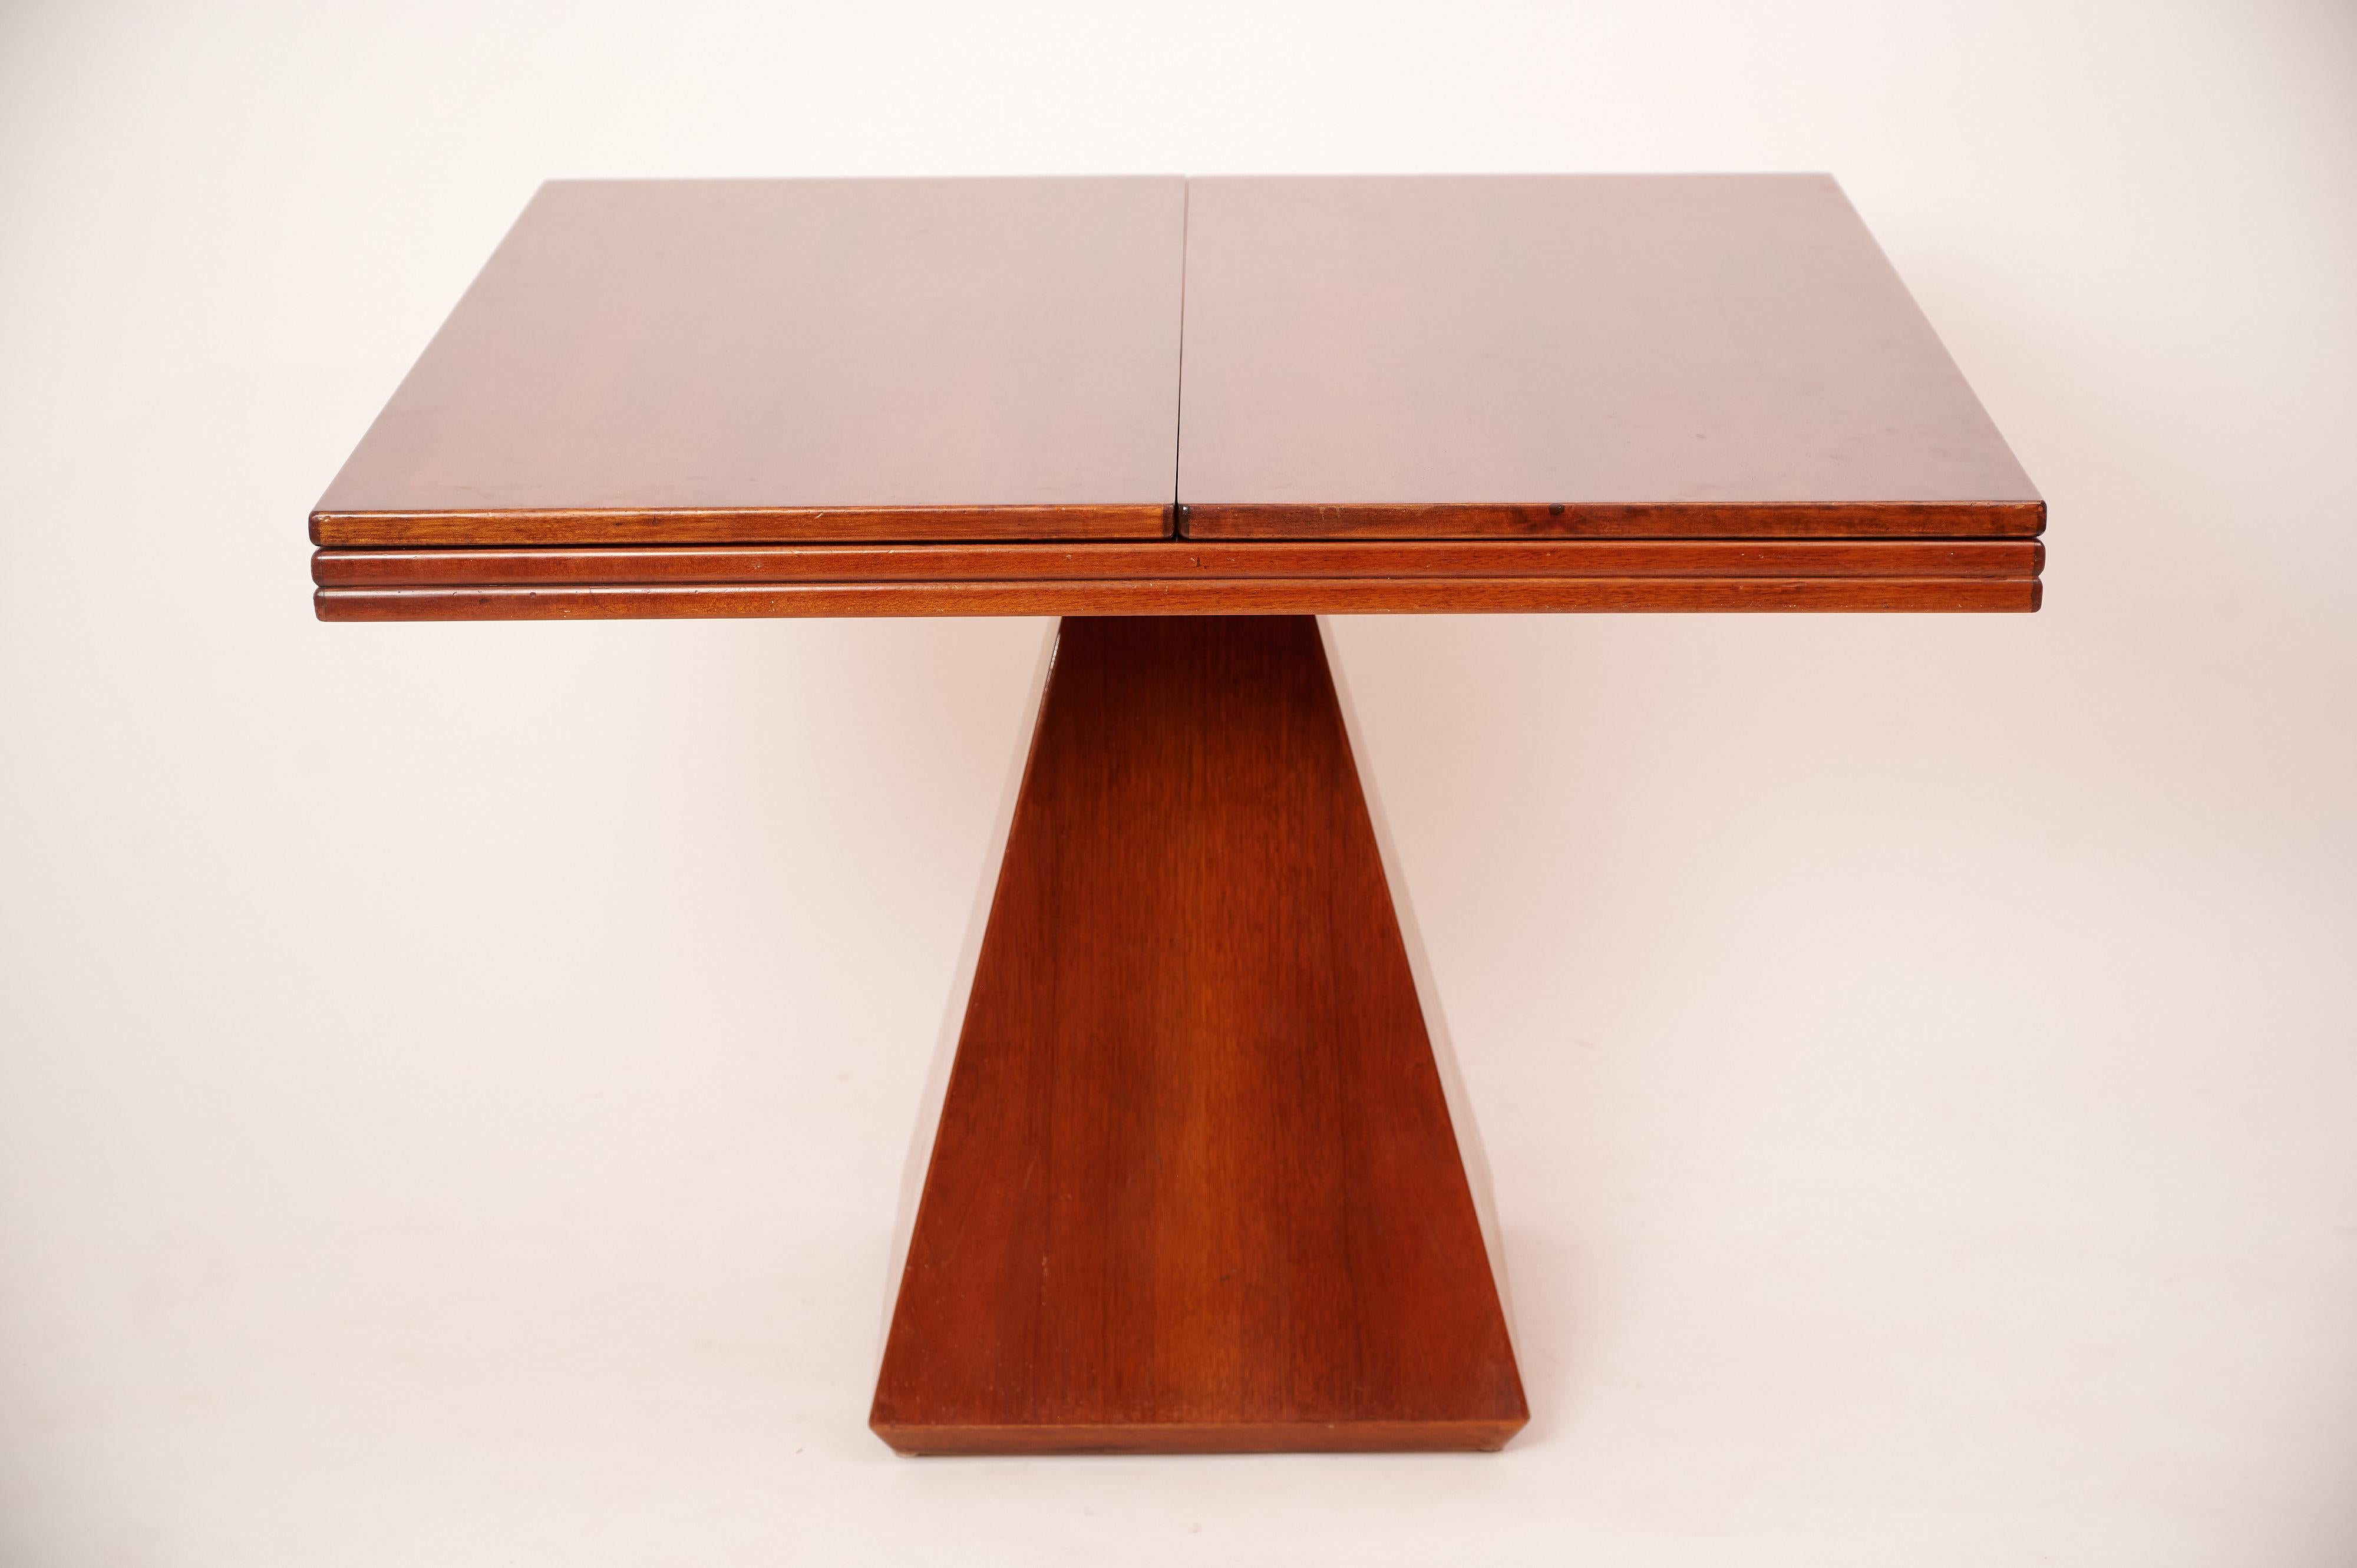 Geometric expanding table by Vittorio Introini. Italy c1968

A square based pyramid which holds a square table top which opens out into a rectangle. Perfectly balanced on a metal 'cross' which invisibly fits into the table top. The base is